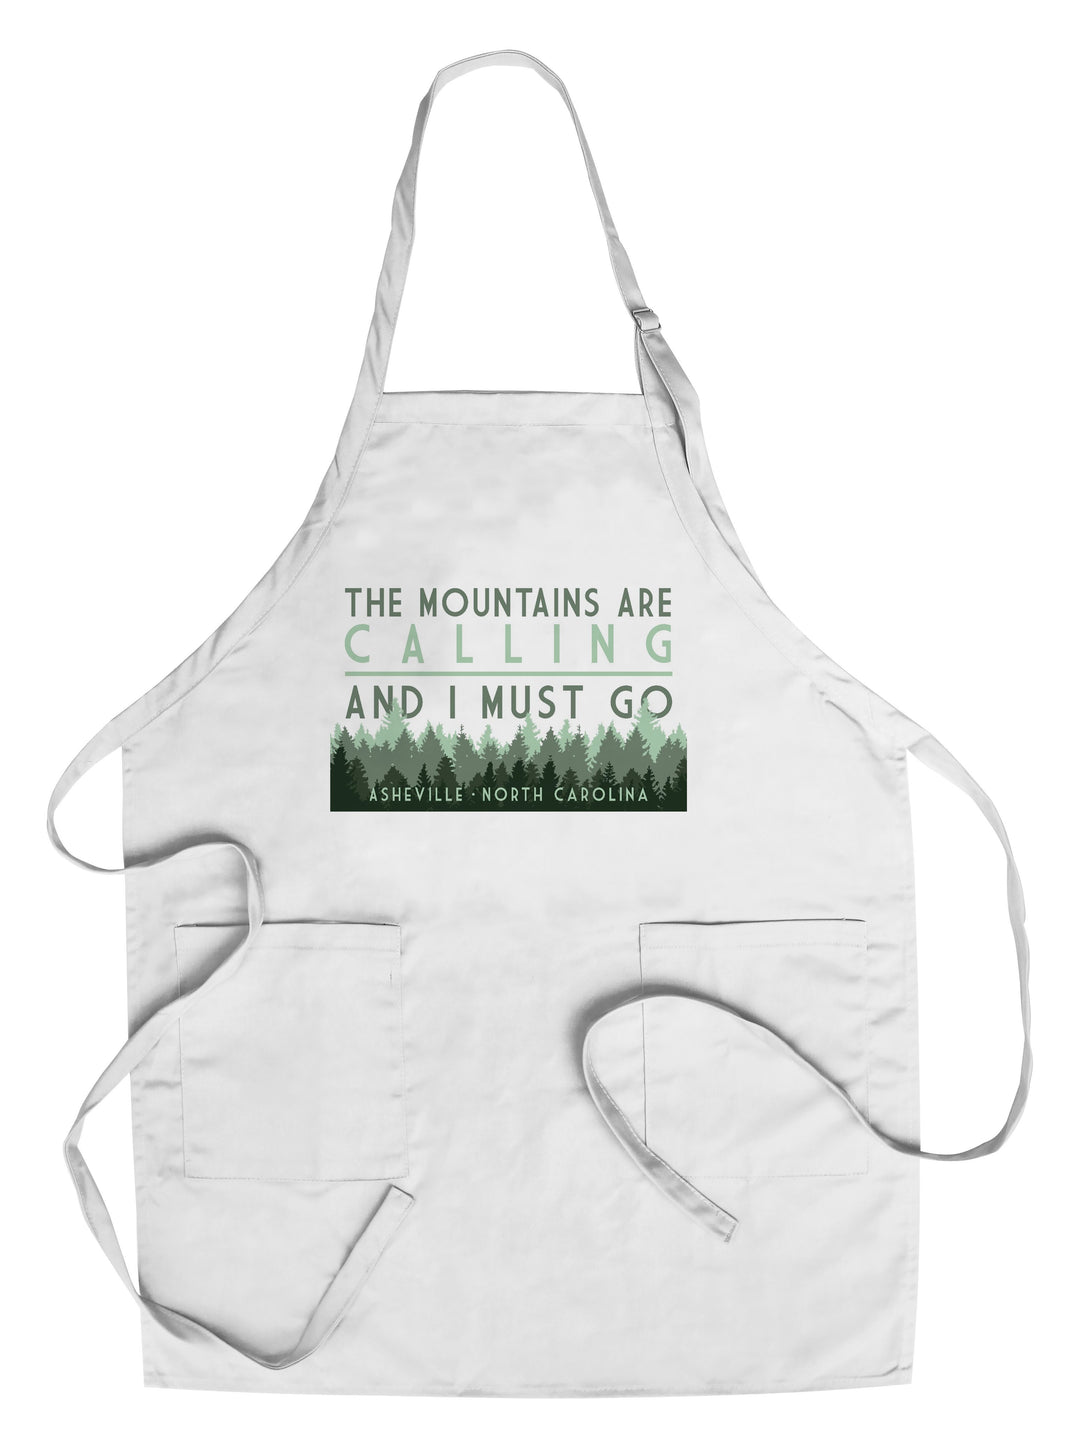 Asheville, North Carolina, The Mountains Are Calling, Pine Trees, Lantern Press Artwork, Towels and Aprons Kitchen Lantern Press Chef's Apron 